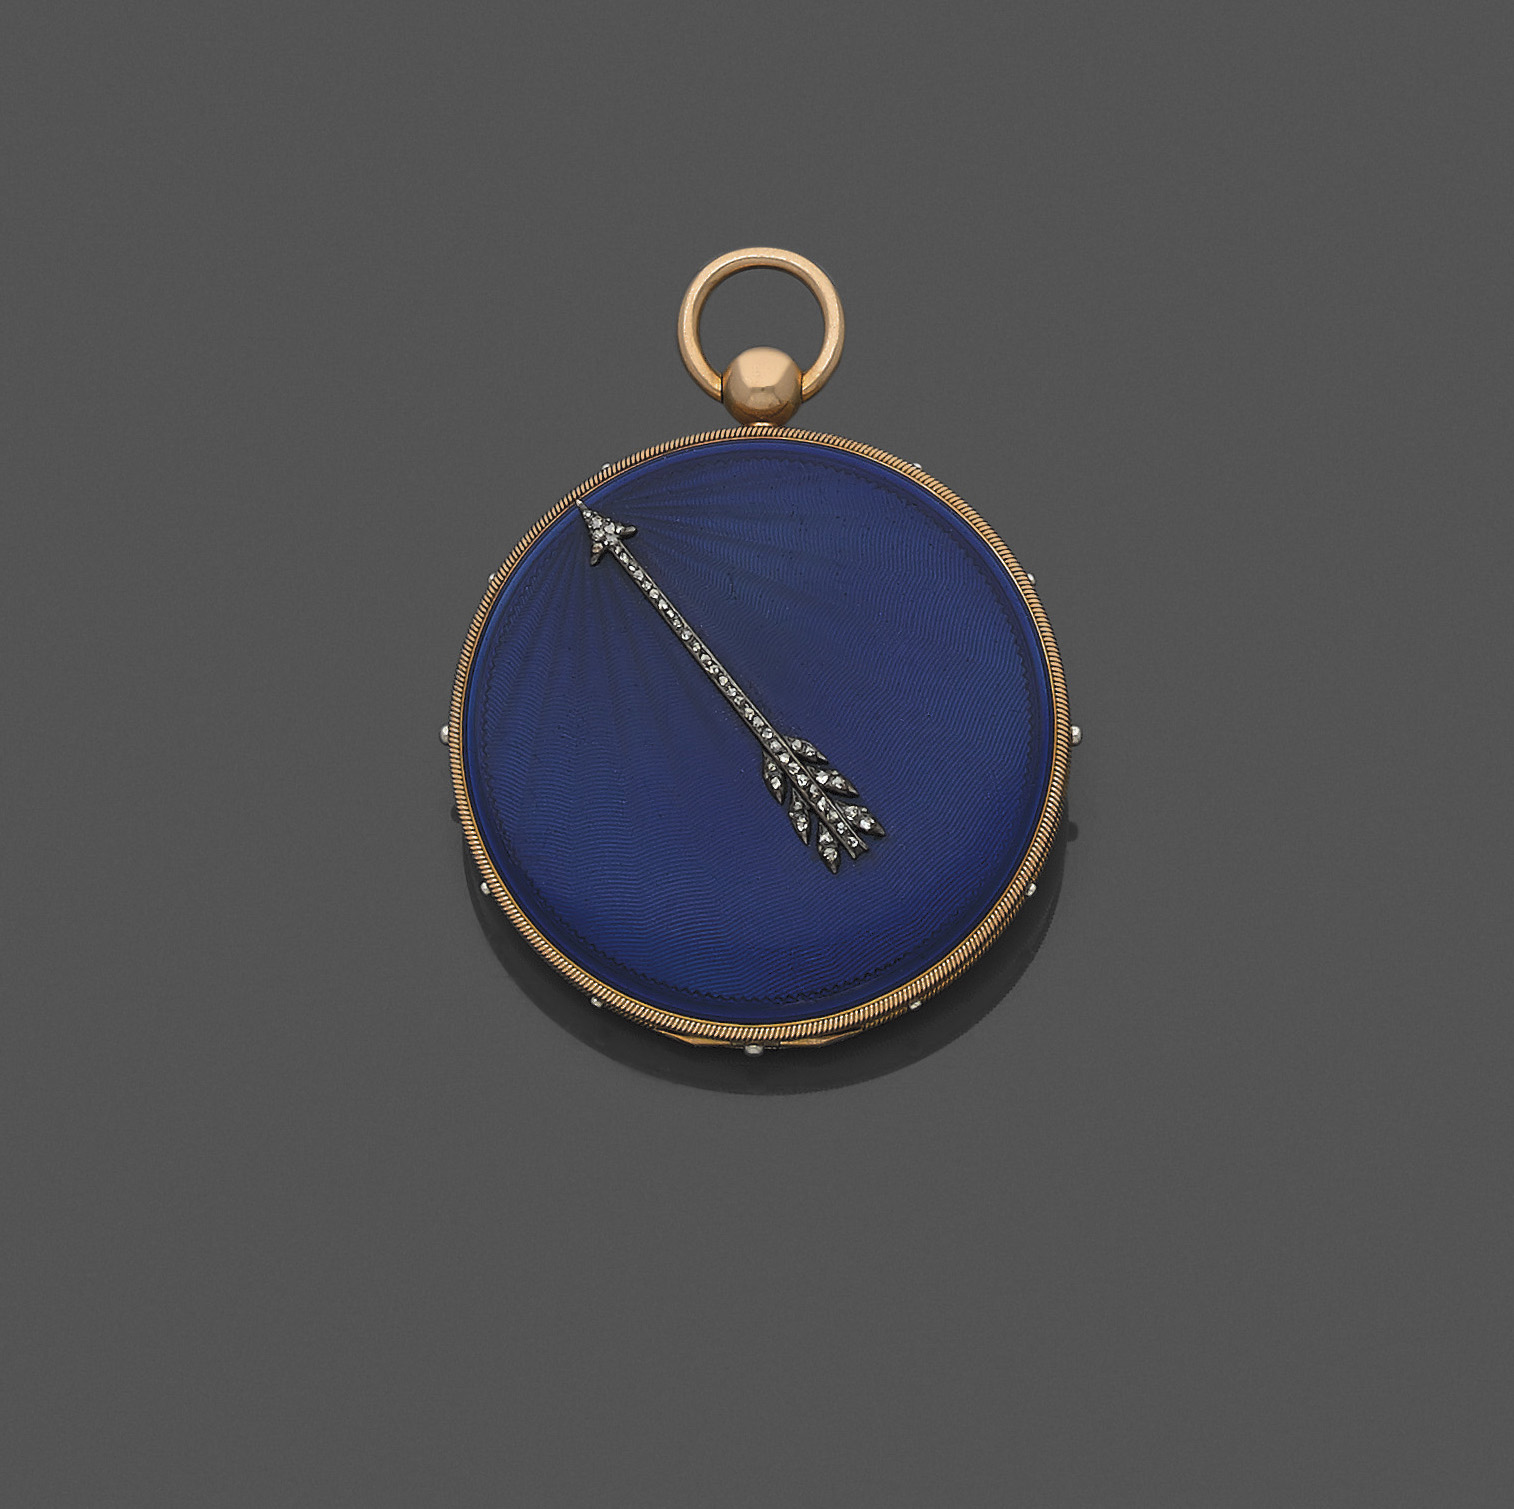 A Gem of a Watch by Breguet with a Distinguished Provenance